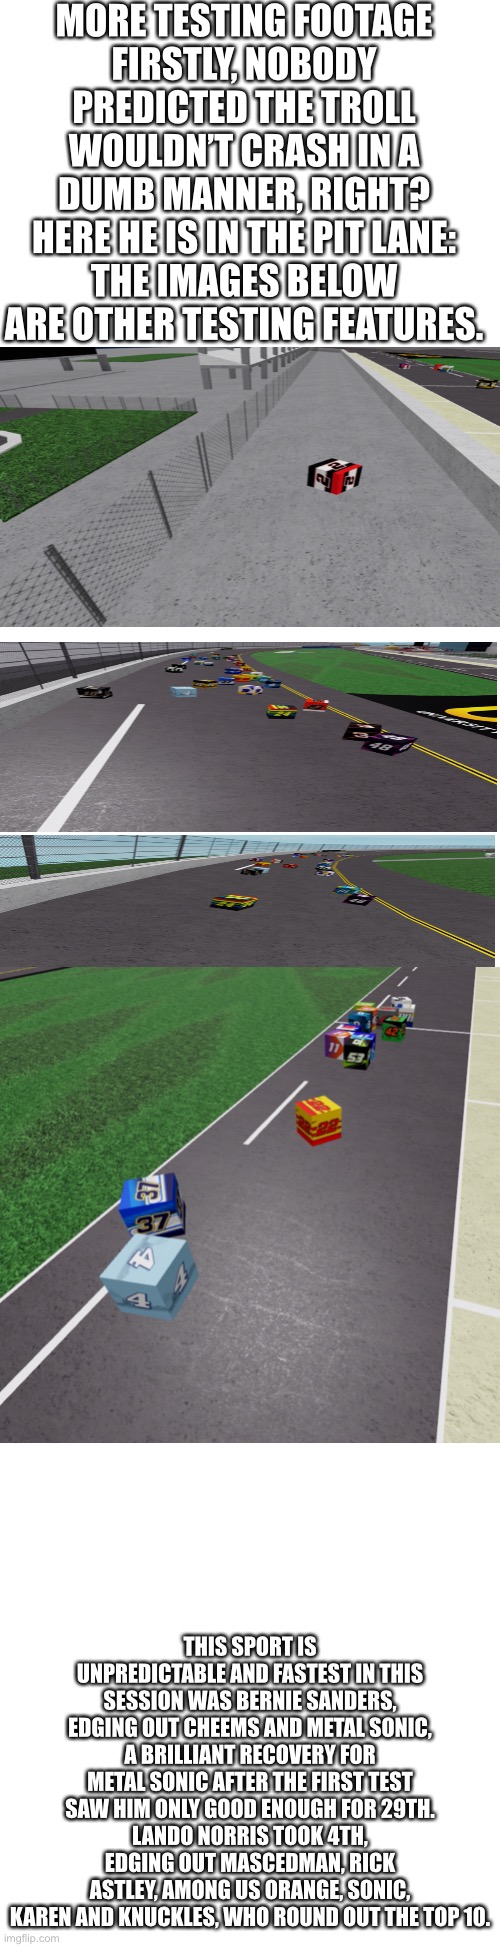 Only thing you can accurately predict is an accident for Troll (2). | MORE TESTING FOOTAGE
FIRSTLY, NOBODY PREDICTED THE TROLL WOULDN’T CRASH IN A DUMB MANNER, RIGHT?
HERE HE IS IN THE PIT LANE:
THE IMAGES BELOW ARE OTHER TESTING FEATURES. THIS SPORT IS UNPREDICTABLE AND FASTEST IN THIS SESSION WAS BERNIE SANDERS, EDGING OUT CHEEMS AND METAL SONIC, A BRILLIANT RECOVERY FOR METAL SONIC AFTER THE FIRST TEST SAW HIM ONLY GOOD ENOUGH FOR 29TH.
LANDO NORRIS TOOK 4TH, EDGING OUT MASCEDMAN, RICK ASTLEY, AMONG US ORANGE, SONIC, KAREN AND KNUCKLES, WHO ROUND OUT THE TOP 10. | image tagged in long blank white,nmcs,nascar,memes,troll,oh wow are you actually reading these tags | made w/ Imgflip meme maker